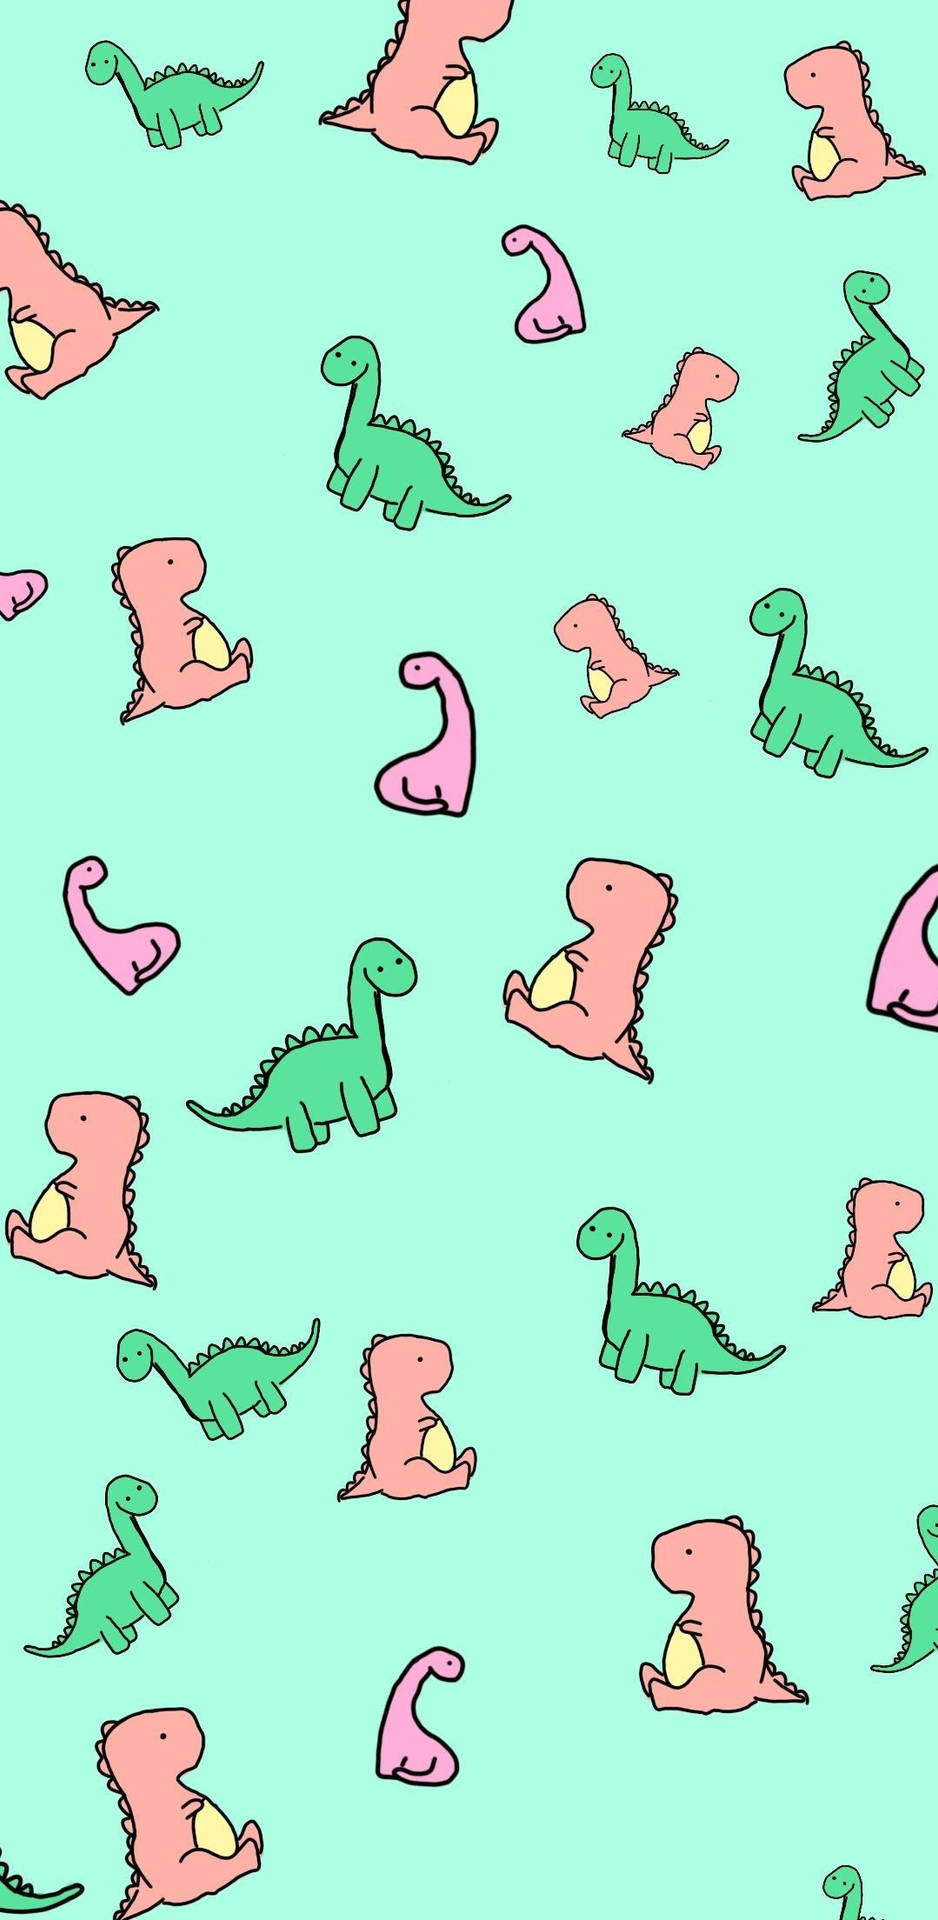 A Cute Dinosaur Pattern With Pink And Green Dinosaurs Wallpaper